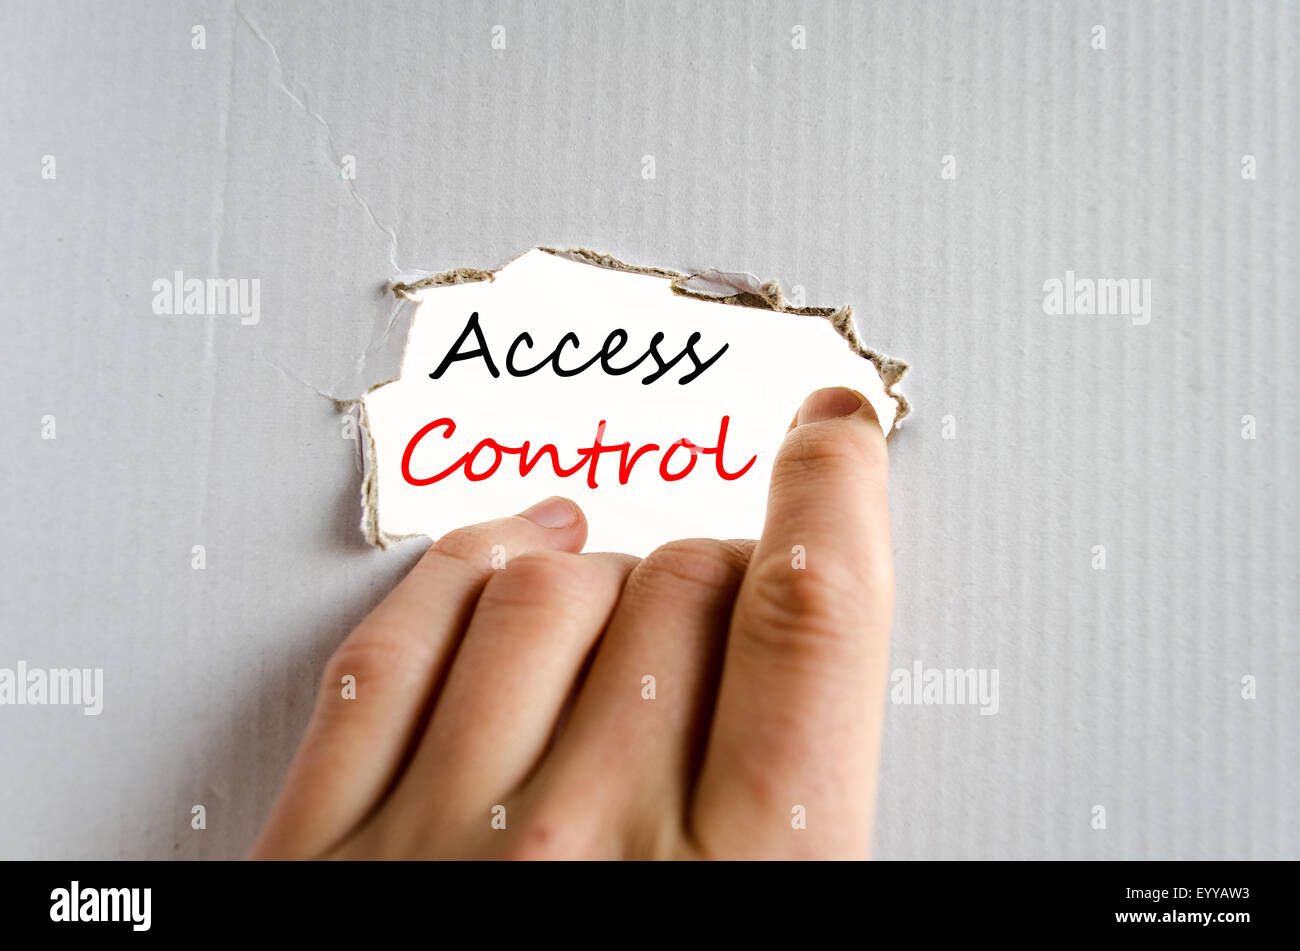 Access control text concept isolated over white background Stock Photo